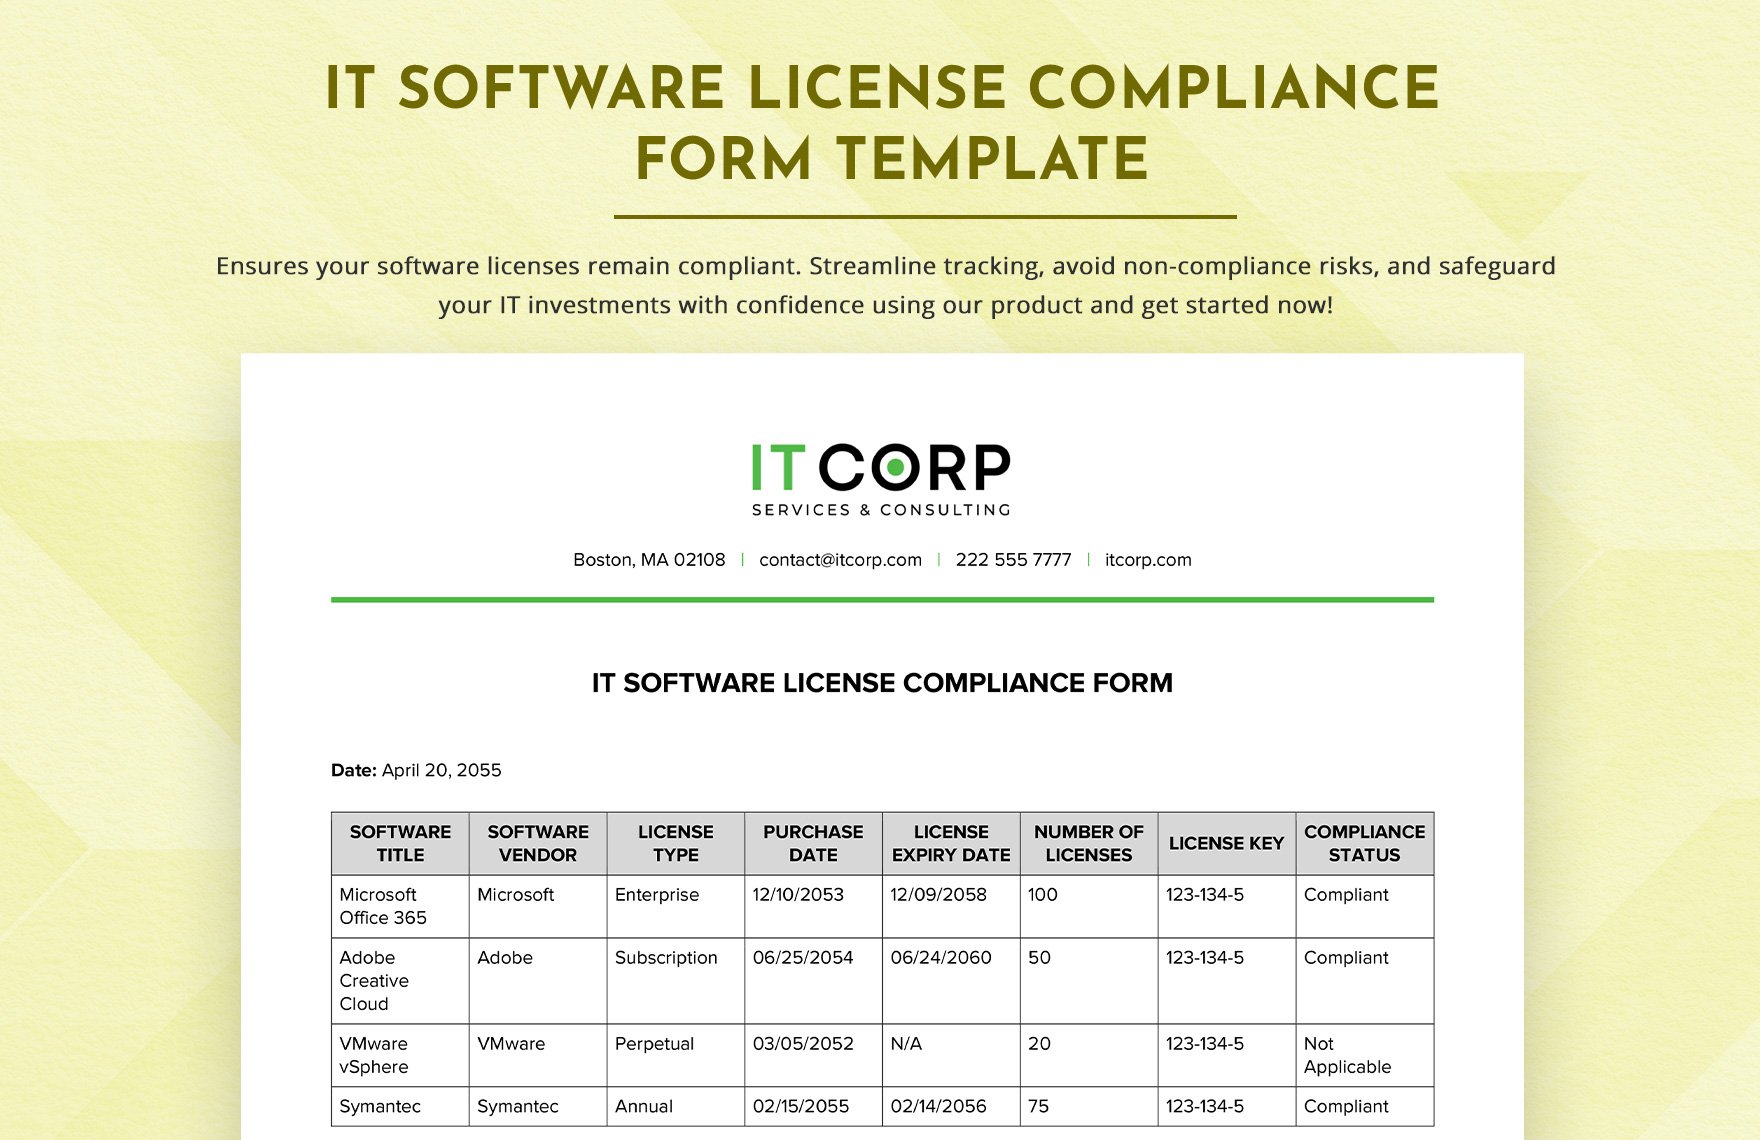 IT Software License Compliance Form Template in Word, Google Docs, PDF